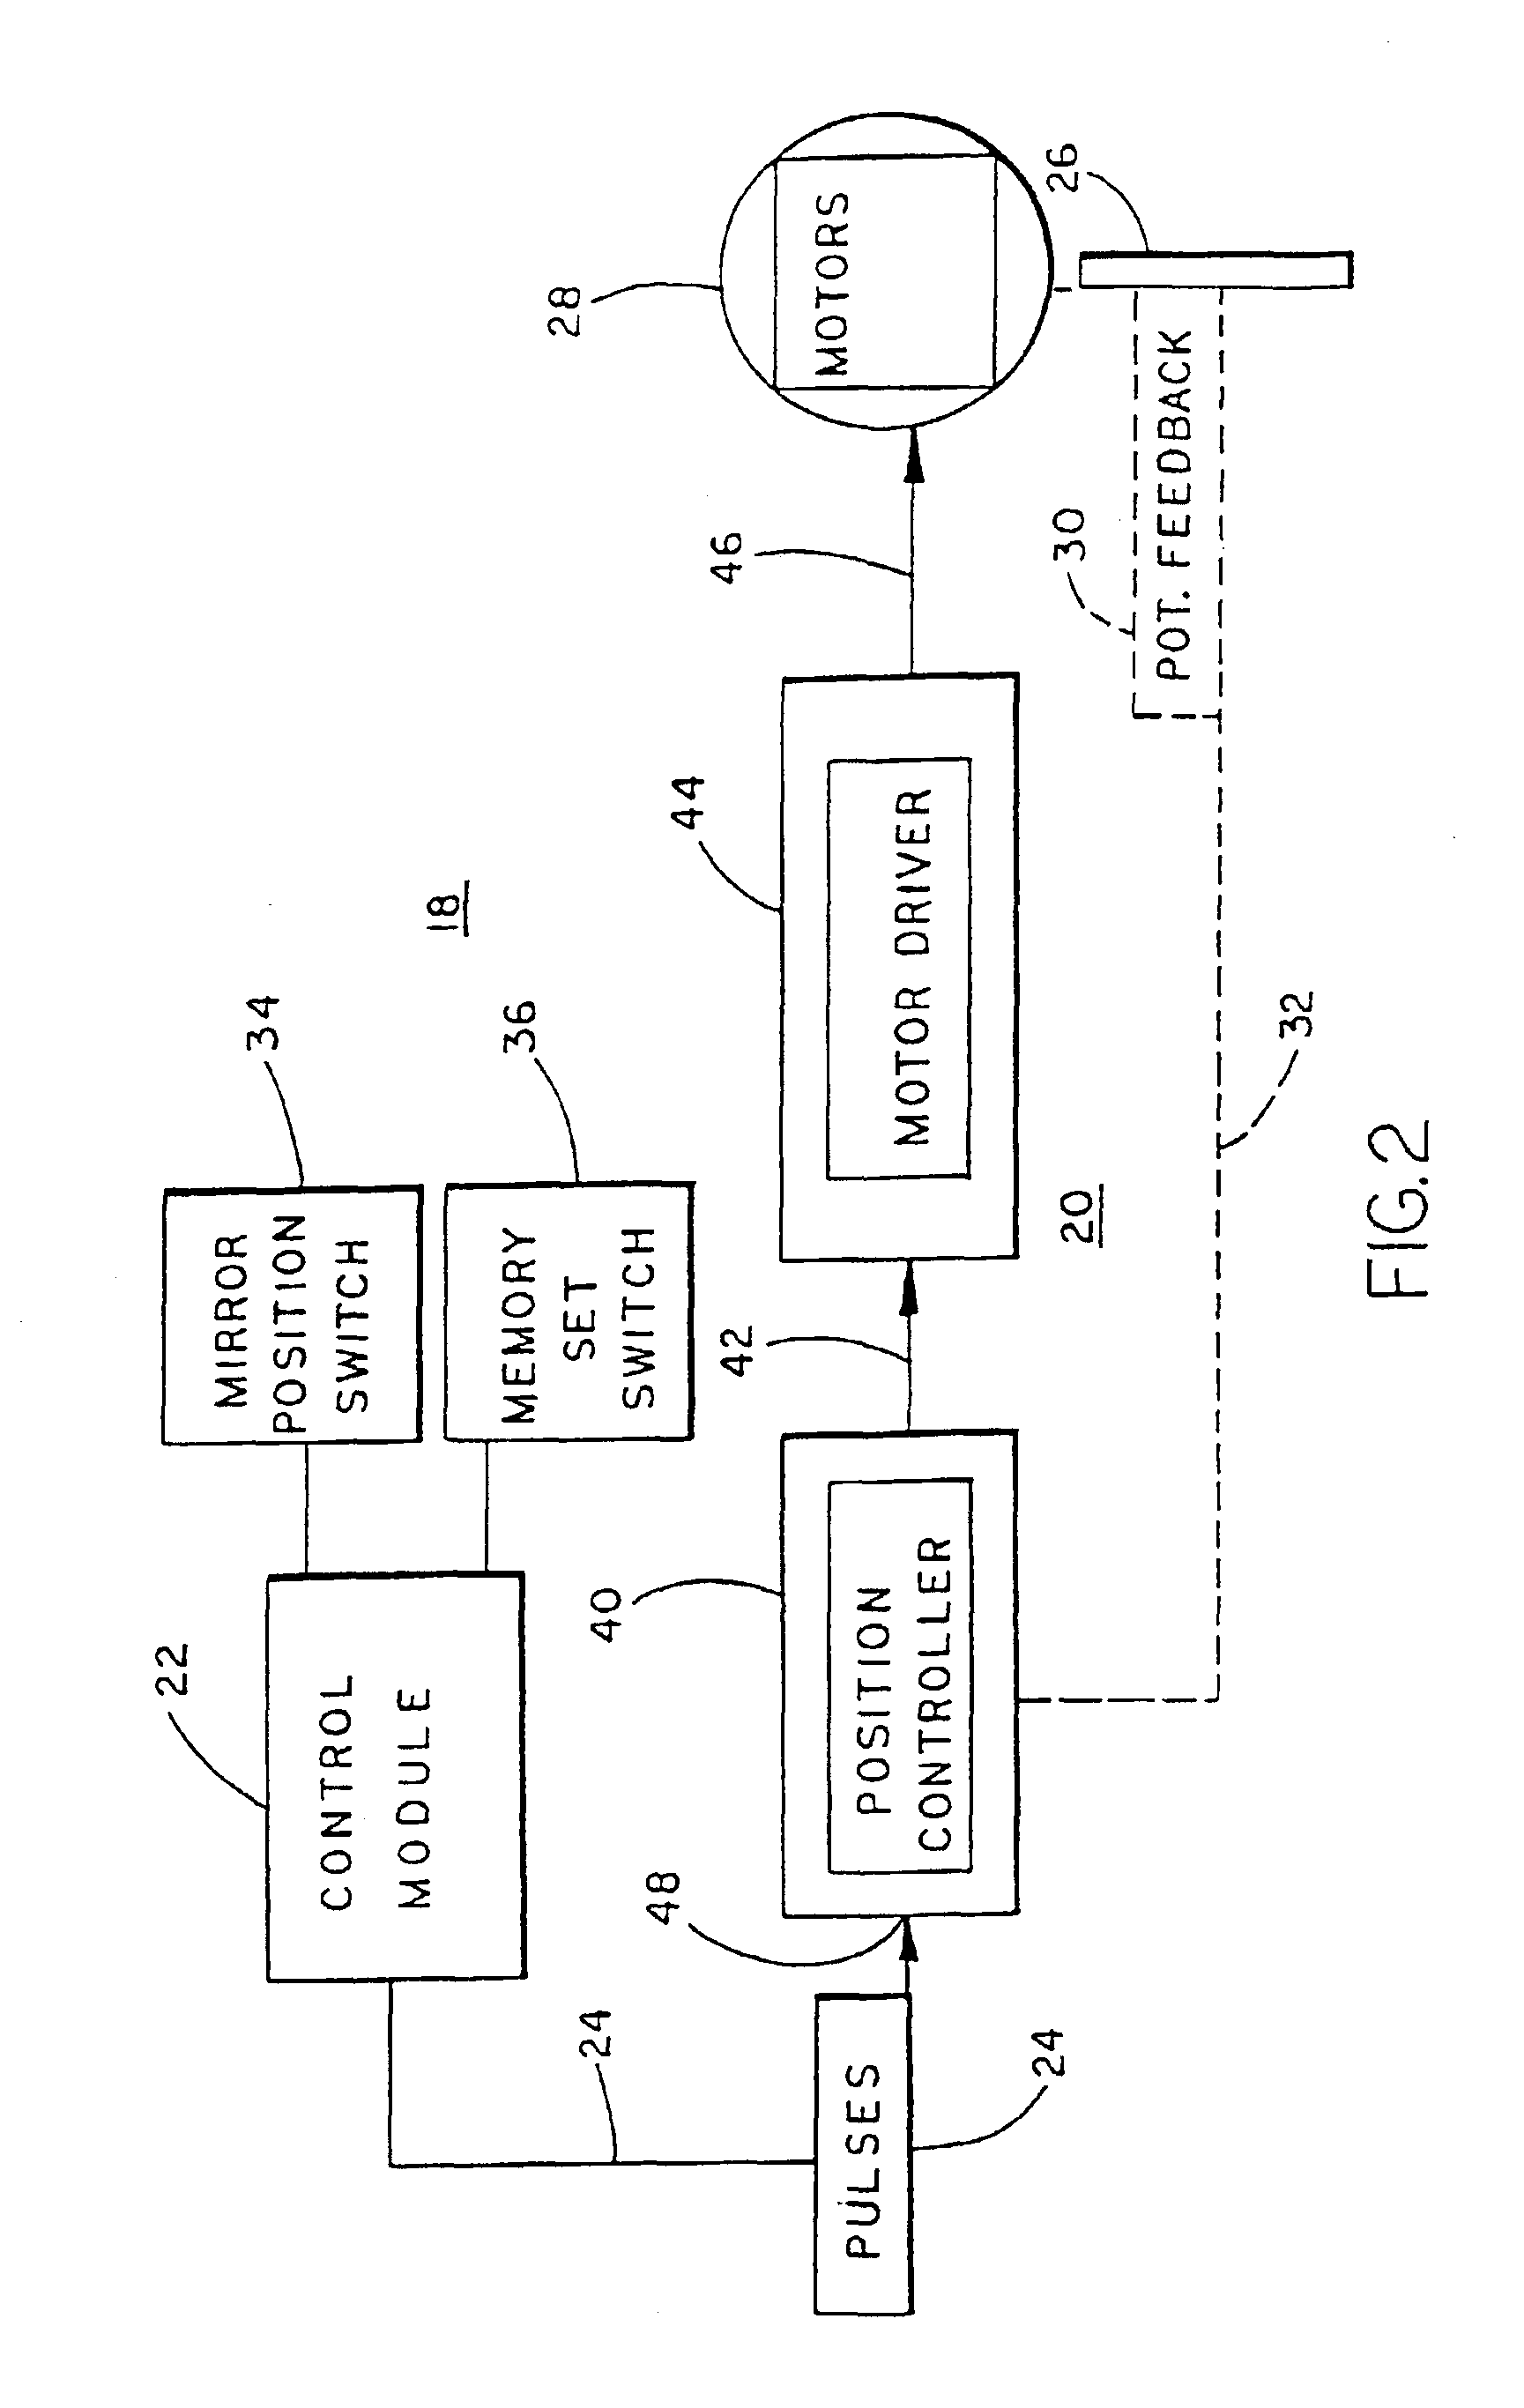 Memory mirror system for vehicles